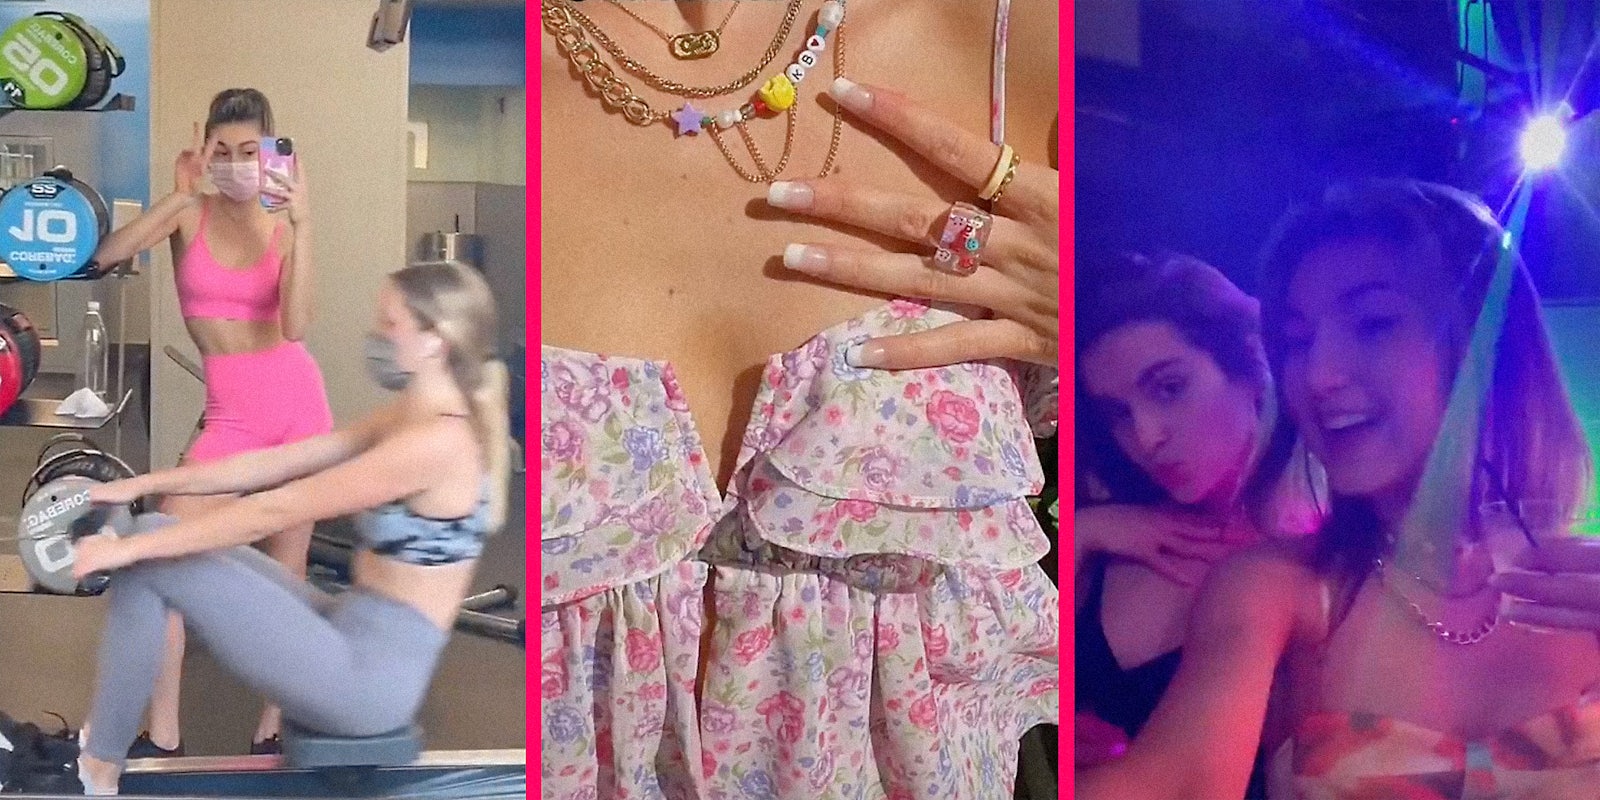 Two girls working out (L), a girl showing off jewelry (C), and two girls at a club (R).